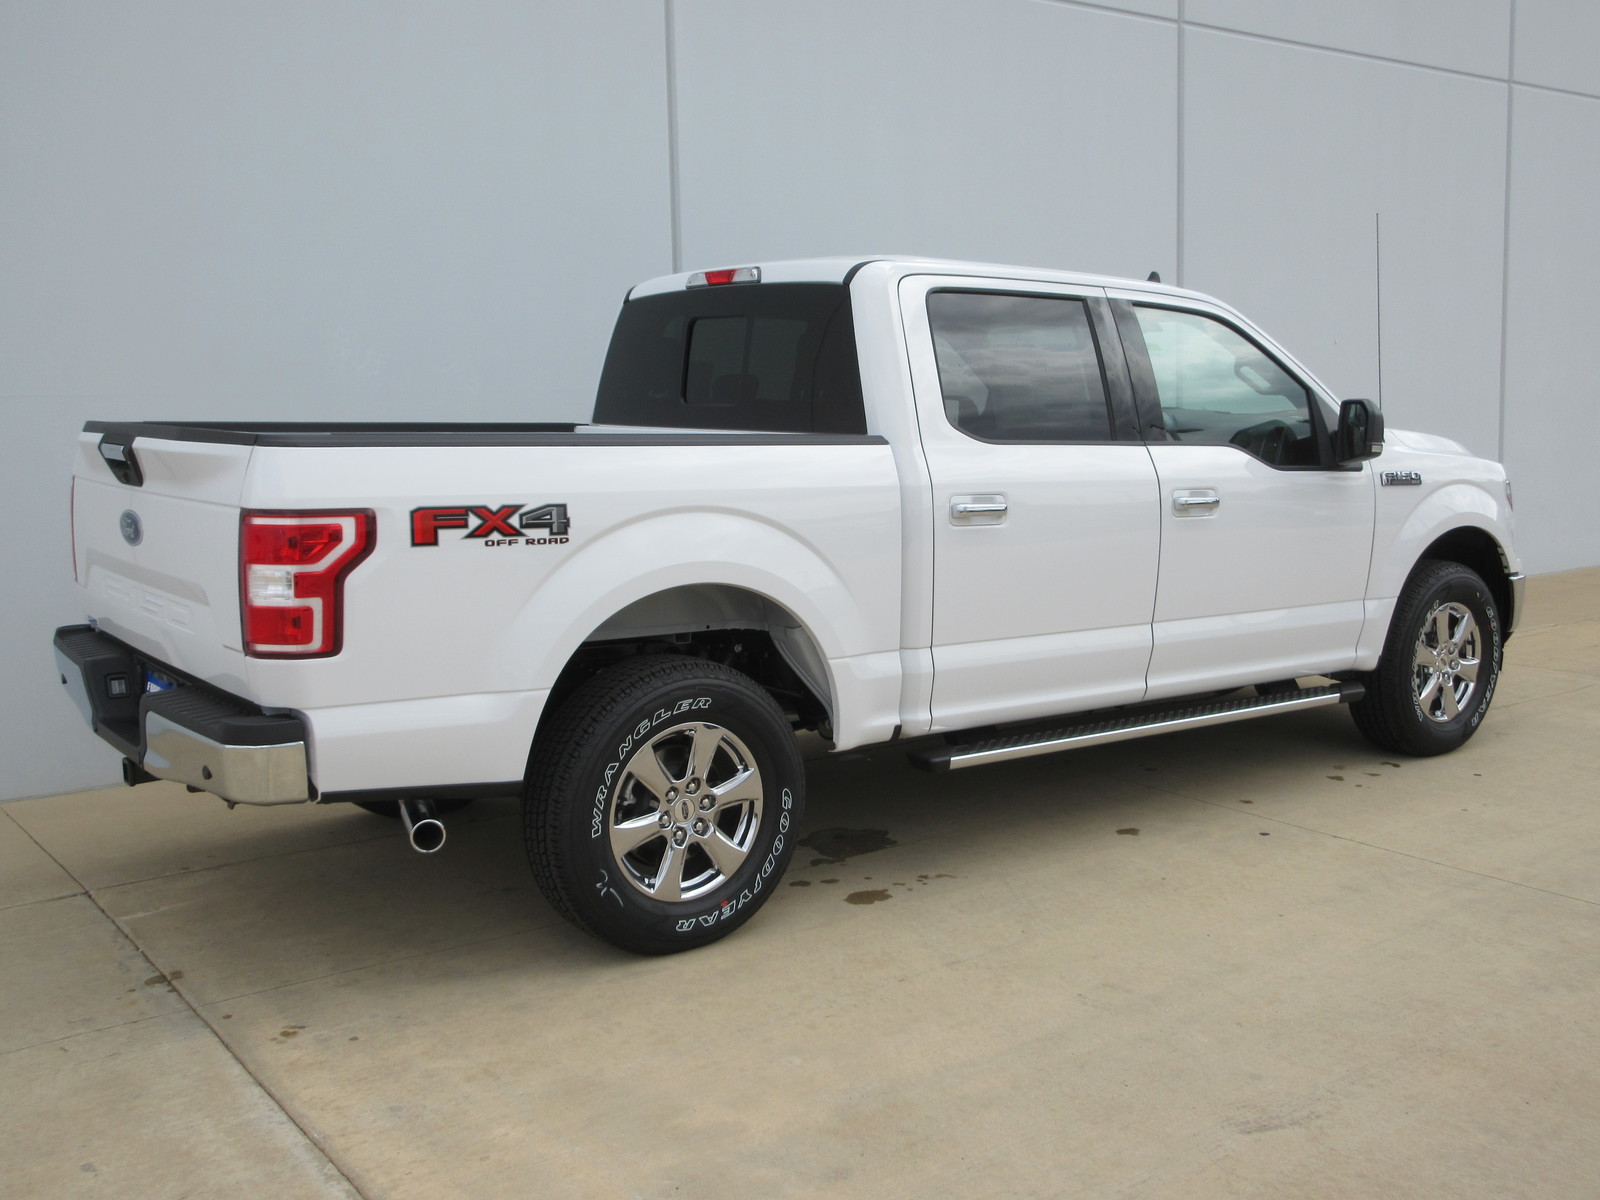 New 2019 Ford F 150 Xlt 4wd Supercrew 55 Box Crew Cab Pickup In Savoy